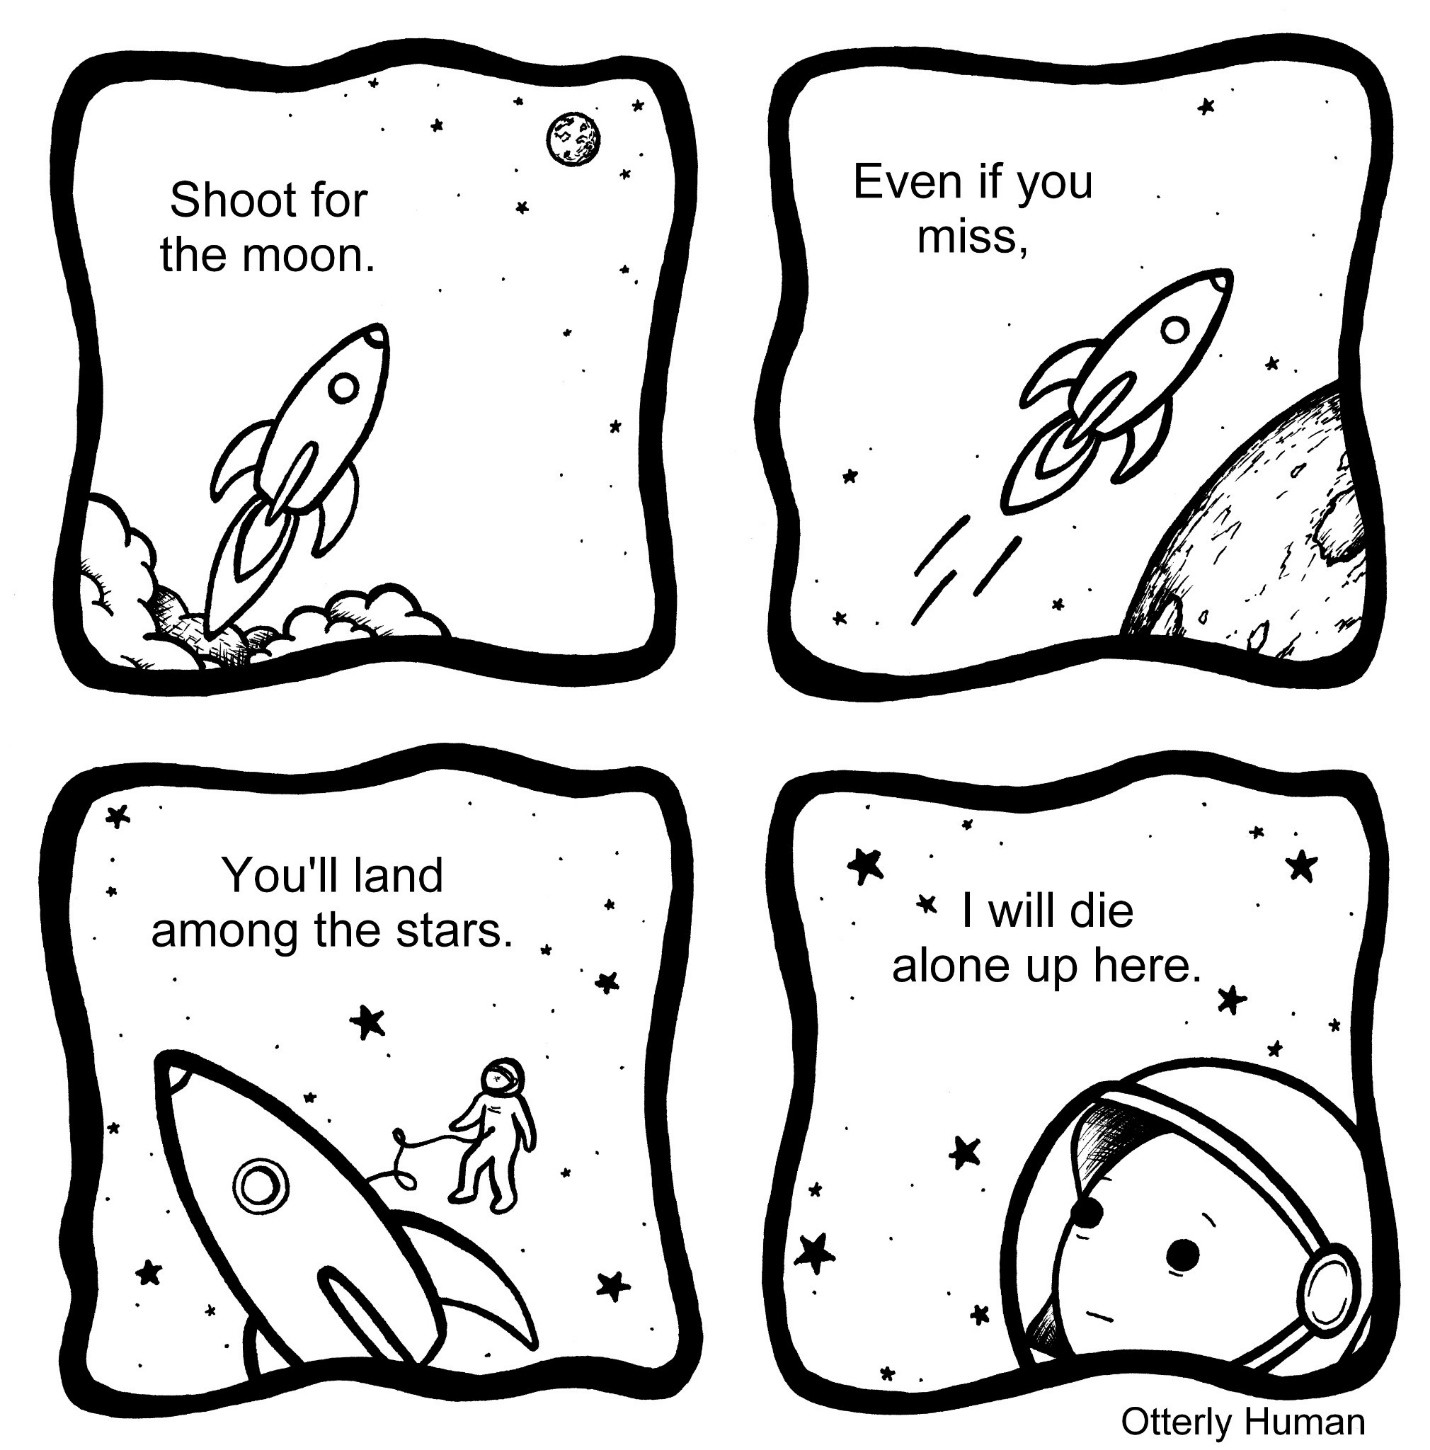 1) *Rocket blasting off to the moon* “Shoot for the moon”
2) *Rocket going past moon* “Even if you miss”
3) *Astronaut tethered to rocket surrounded by stars* “You’ll land among the stars”
4) Astronaut, zoomed in: I will die alone up here.